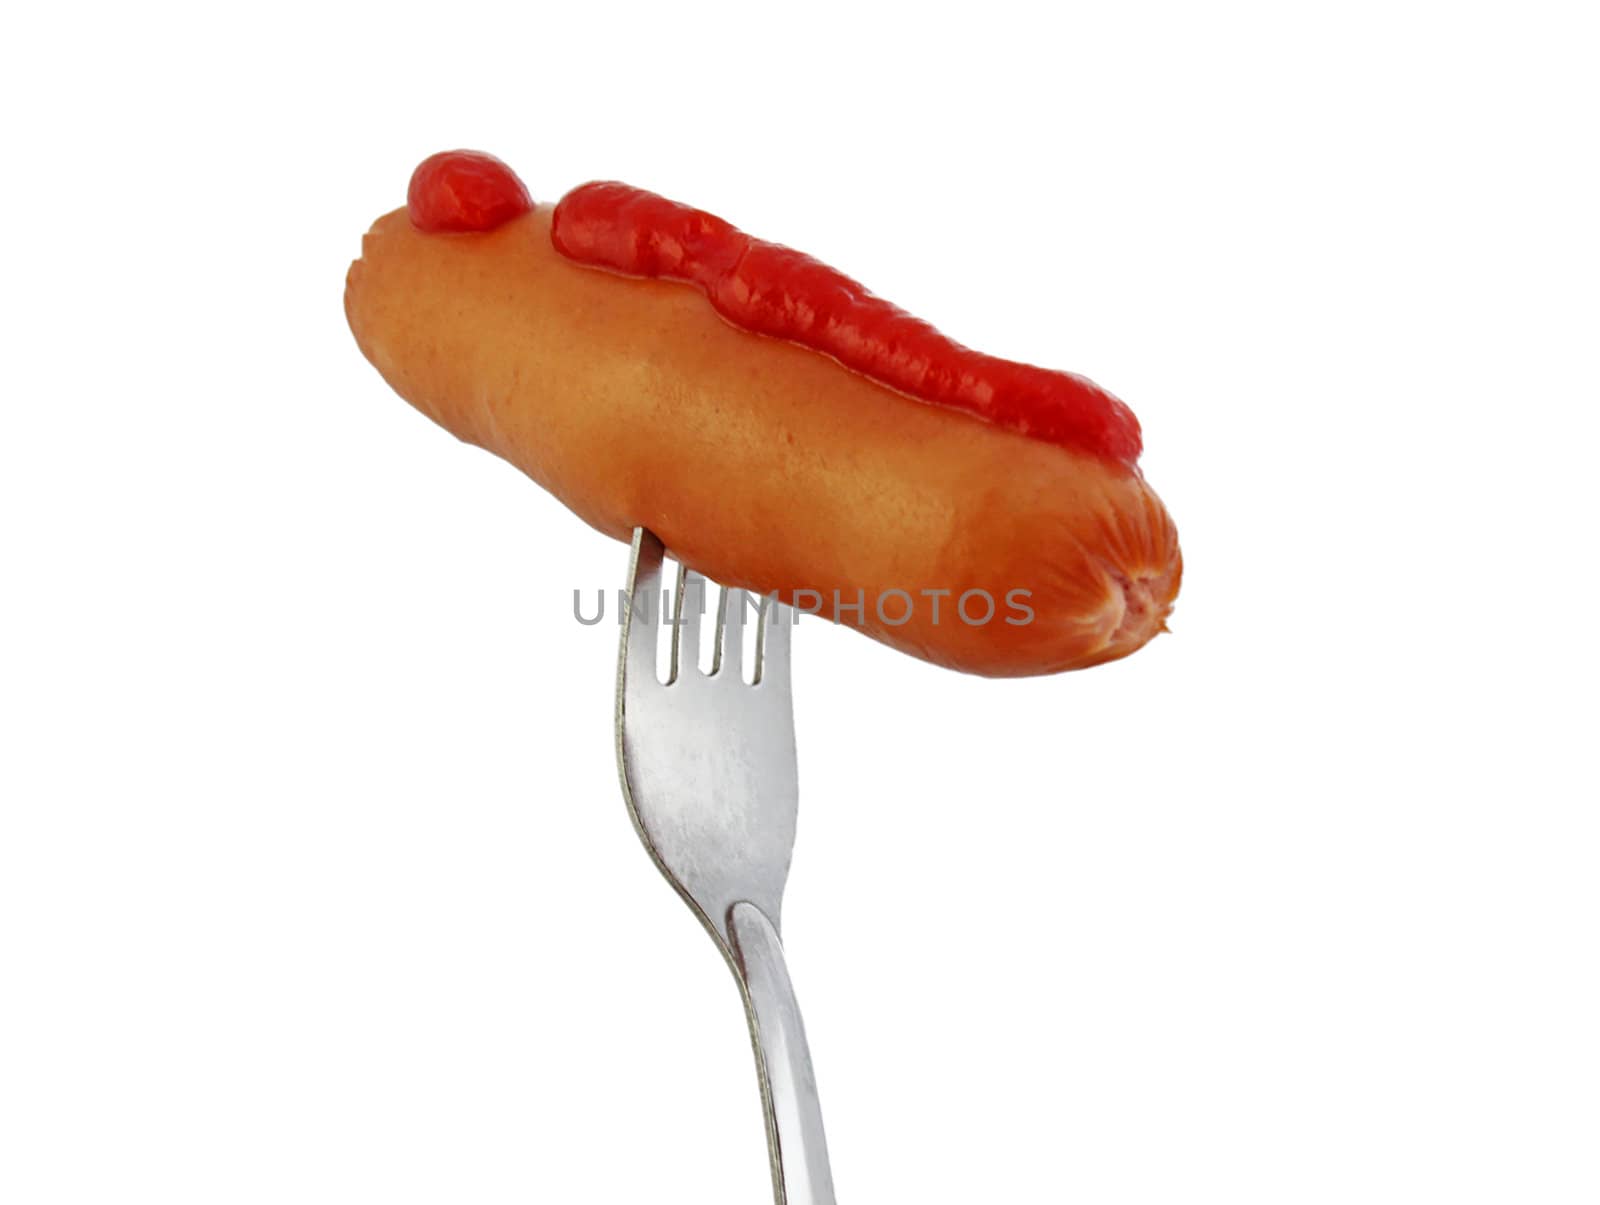 sausage with ketchup on a fork